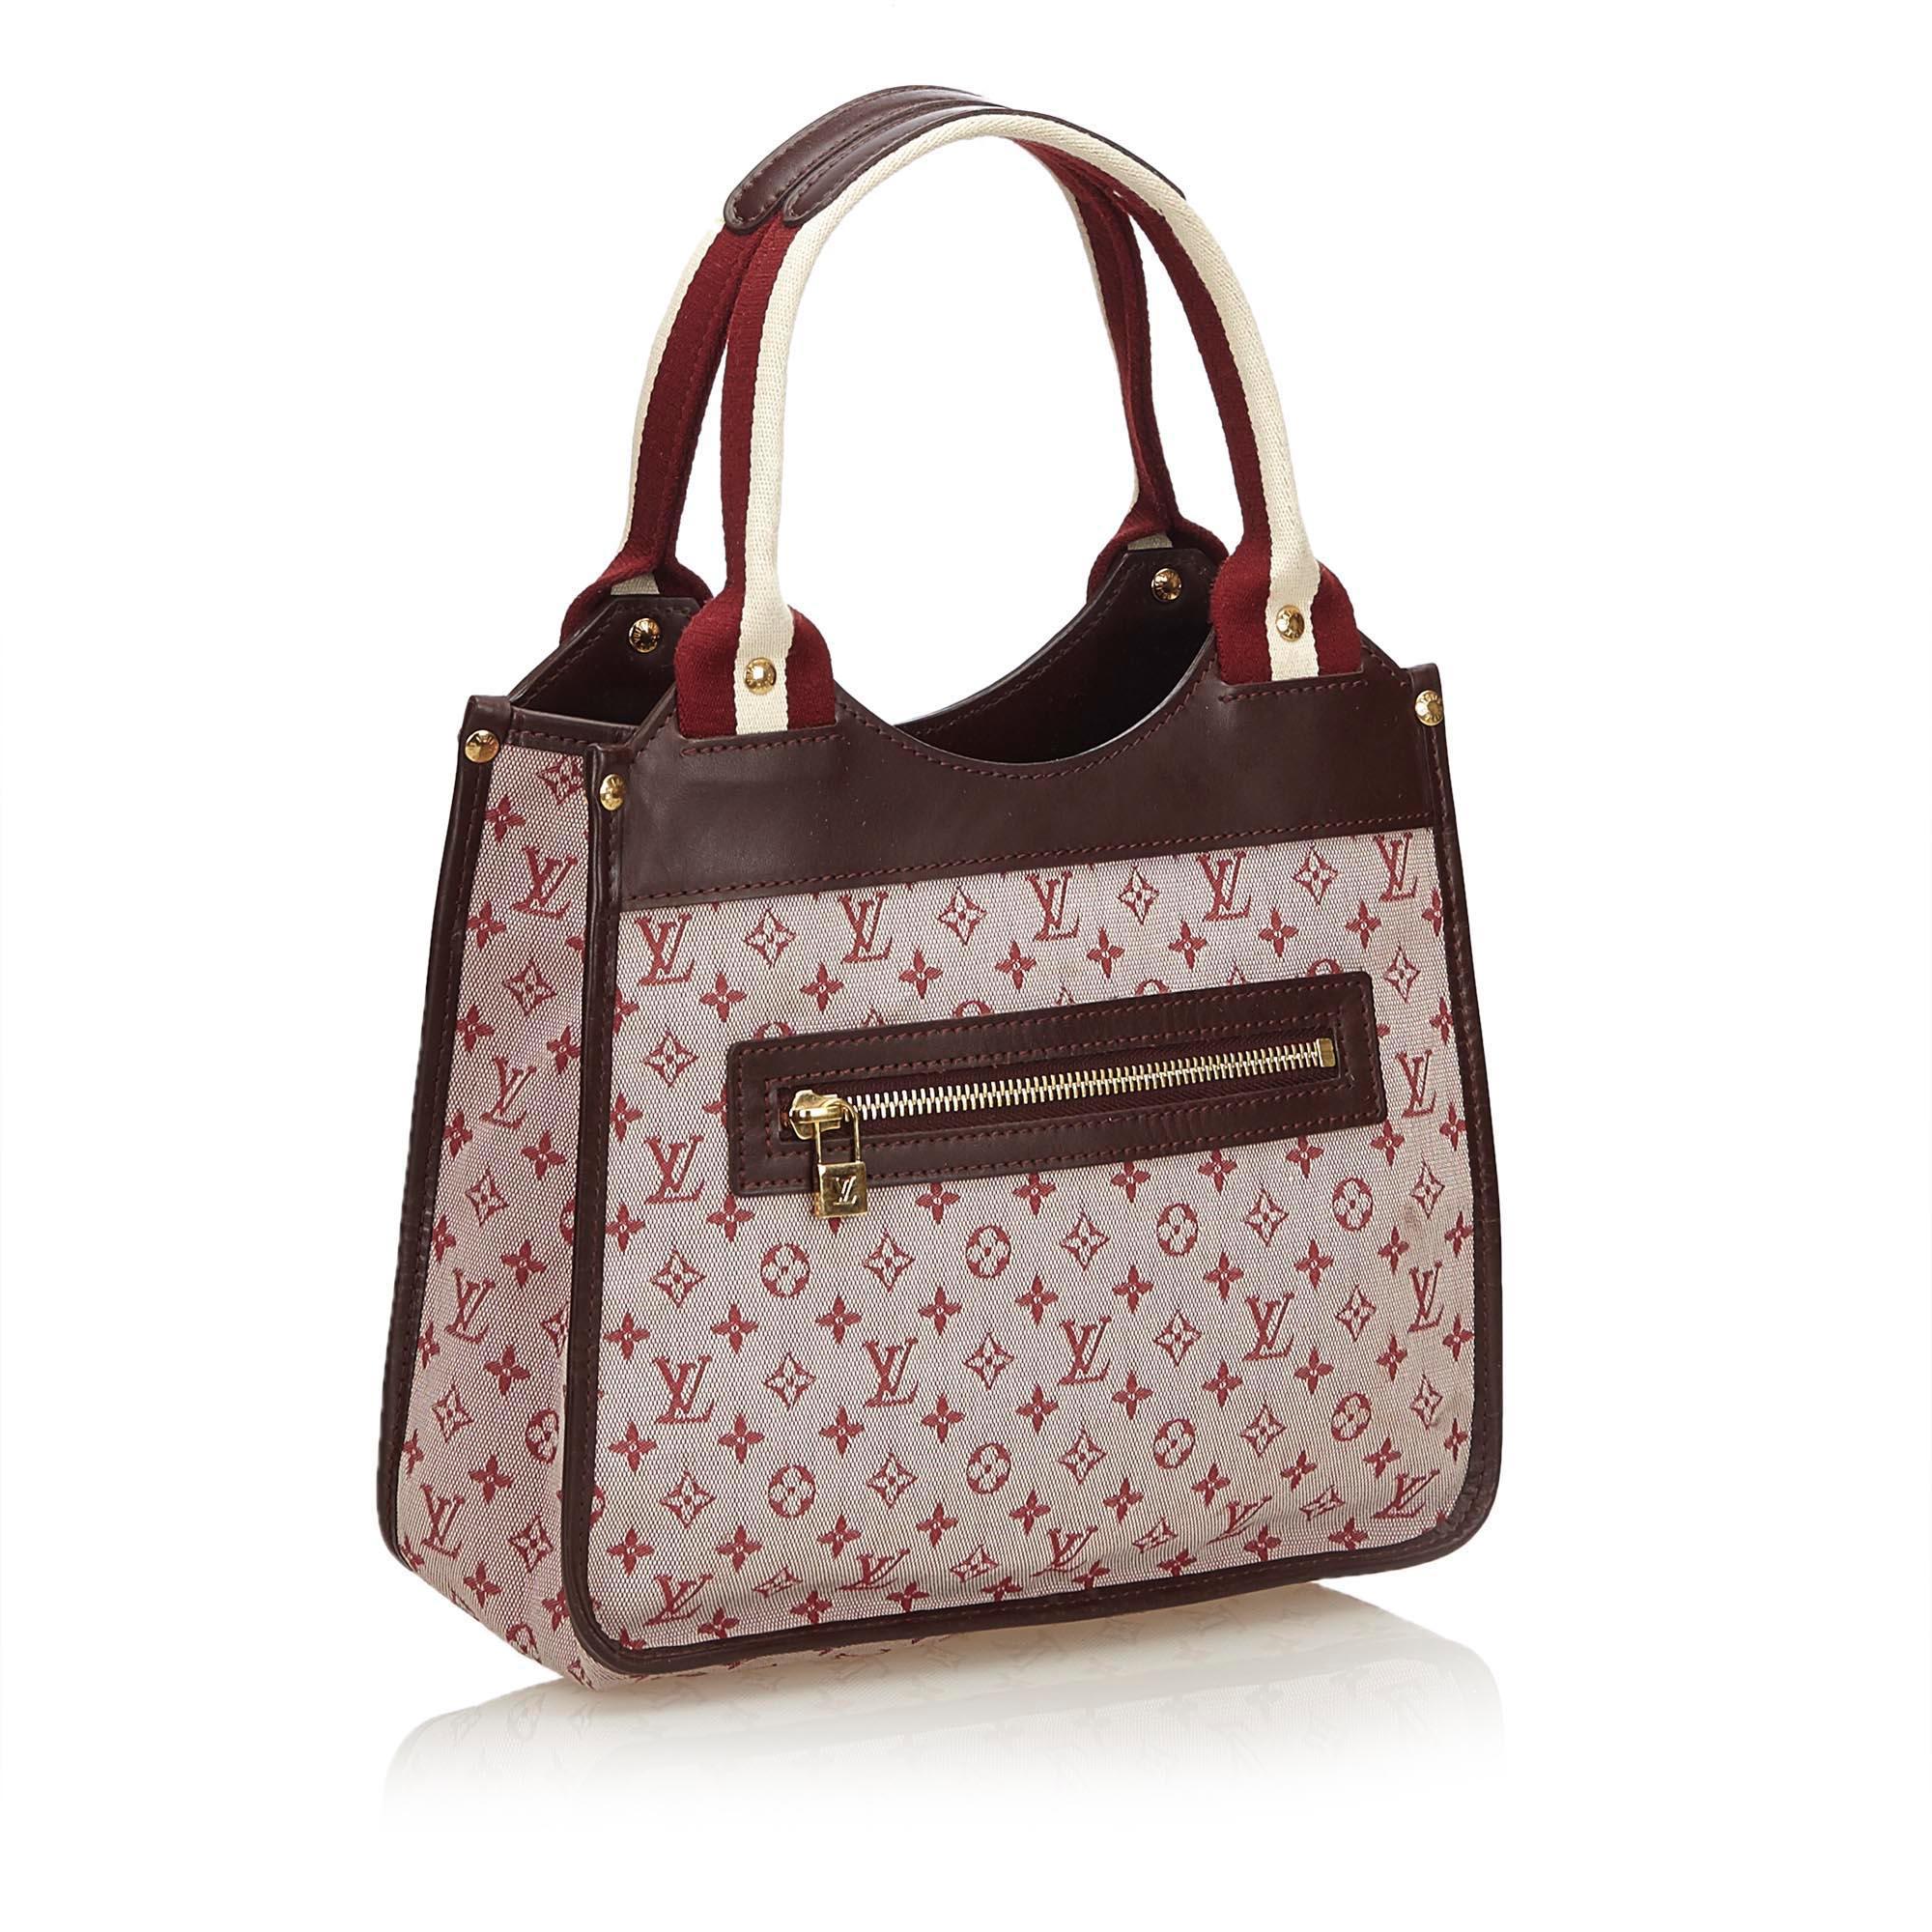 The Sac Kathleen features a monogram jacquard body with leather panels, an exterior zip pocket, an open top, and an interior zip pocket. It carries as AB condition rating.

Inclusions: 
Dust Bag


Louis Vuitton pieces do not come with an